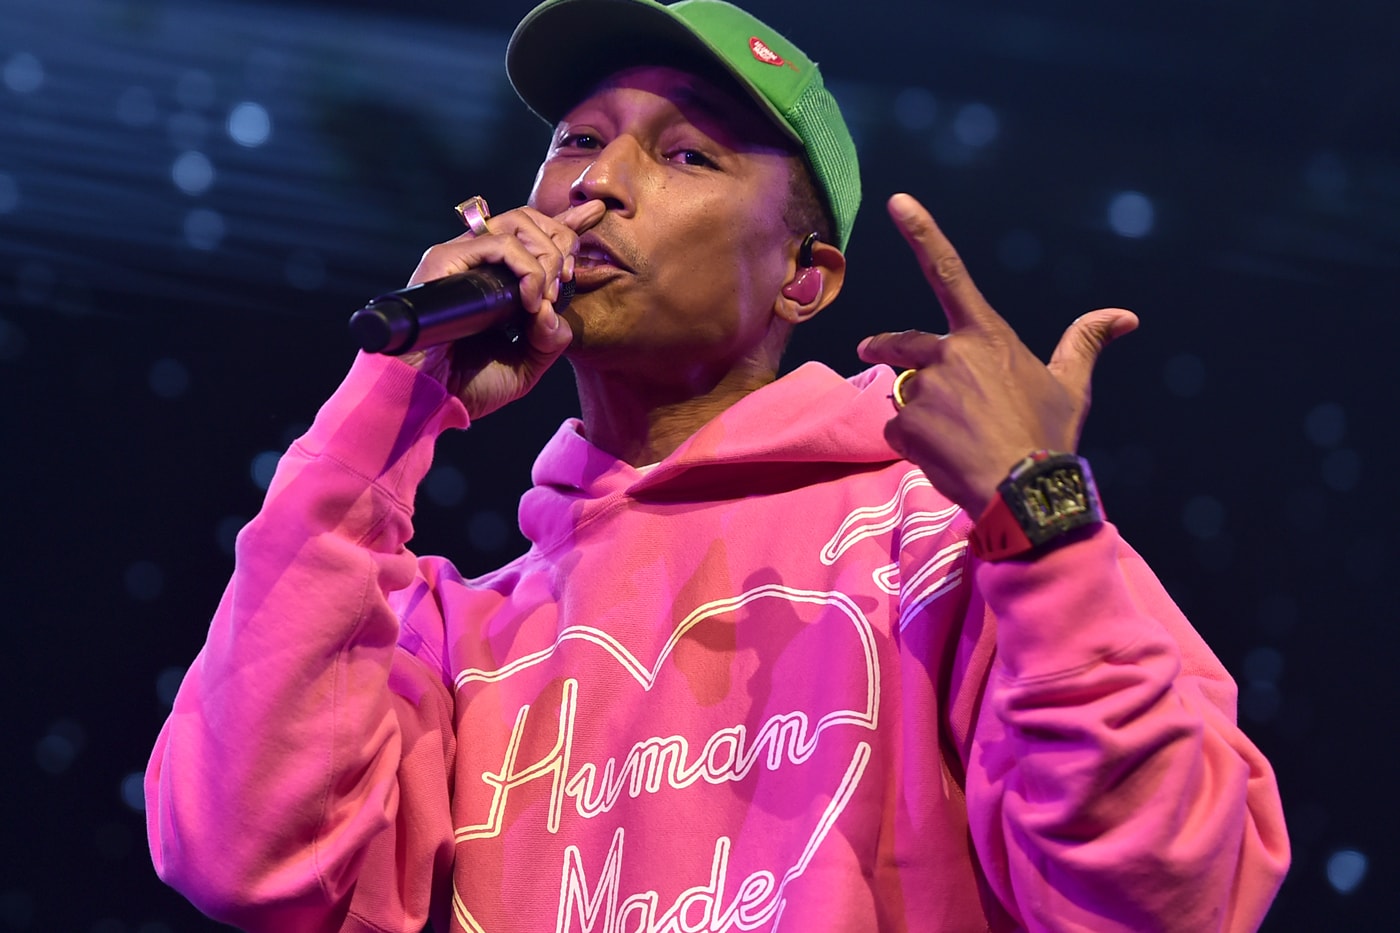 Pharrell Williams City Guide to Tokyo Instagram IGTV Dover Street Market Ginza Afuri